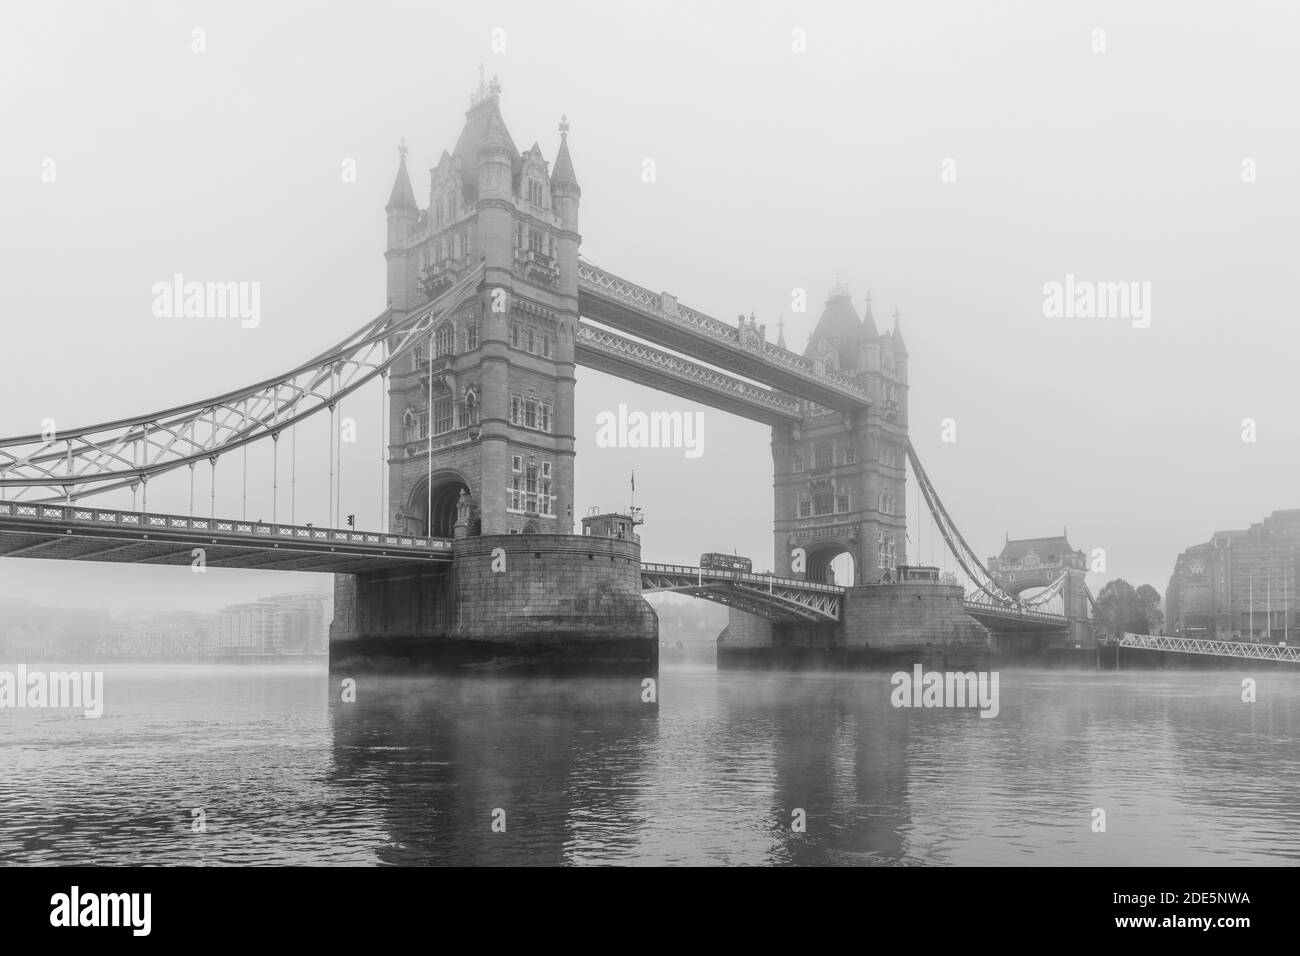 Black and white Tower Bridge and London Bus driving over River Thames in foggy and misty atmospheric, moody weather on Coronavirus Covid-19 lockdown day one, England, UK Stock Photo